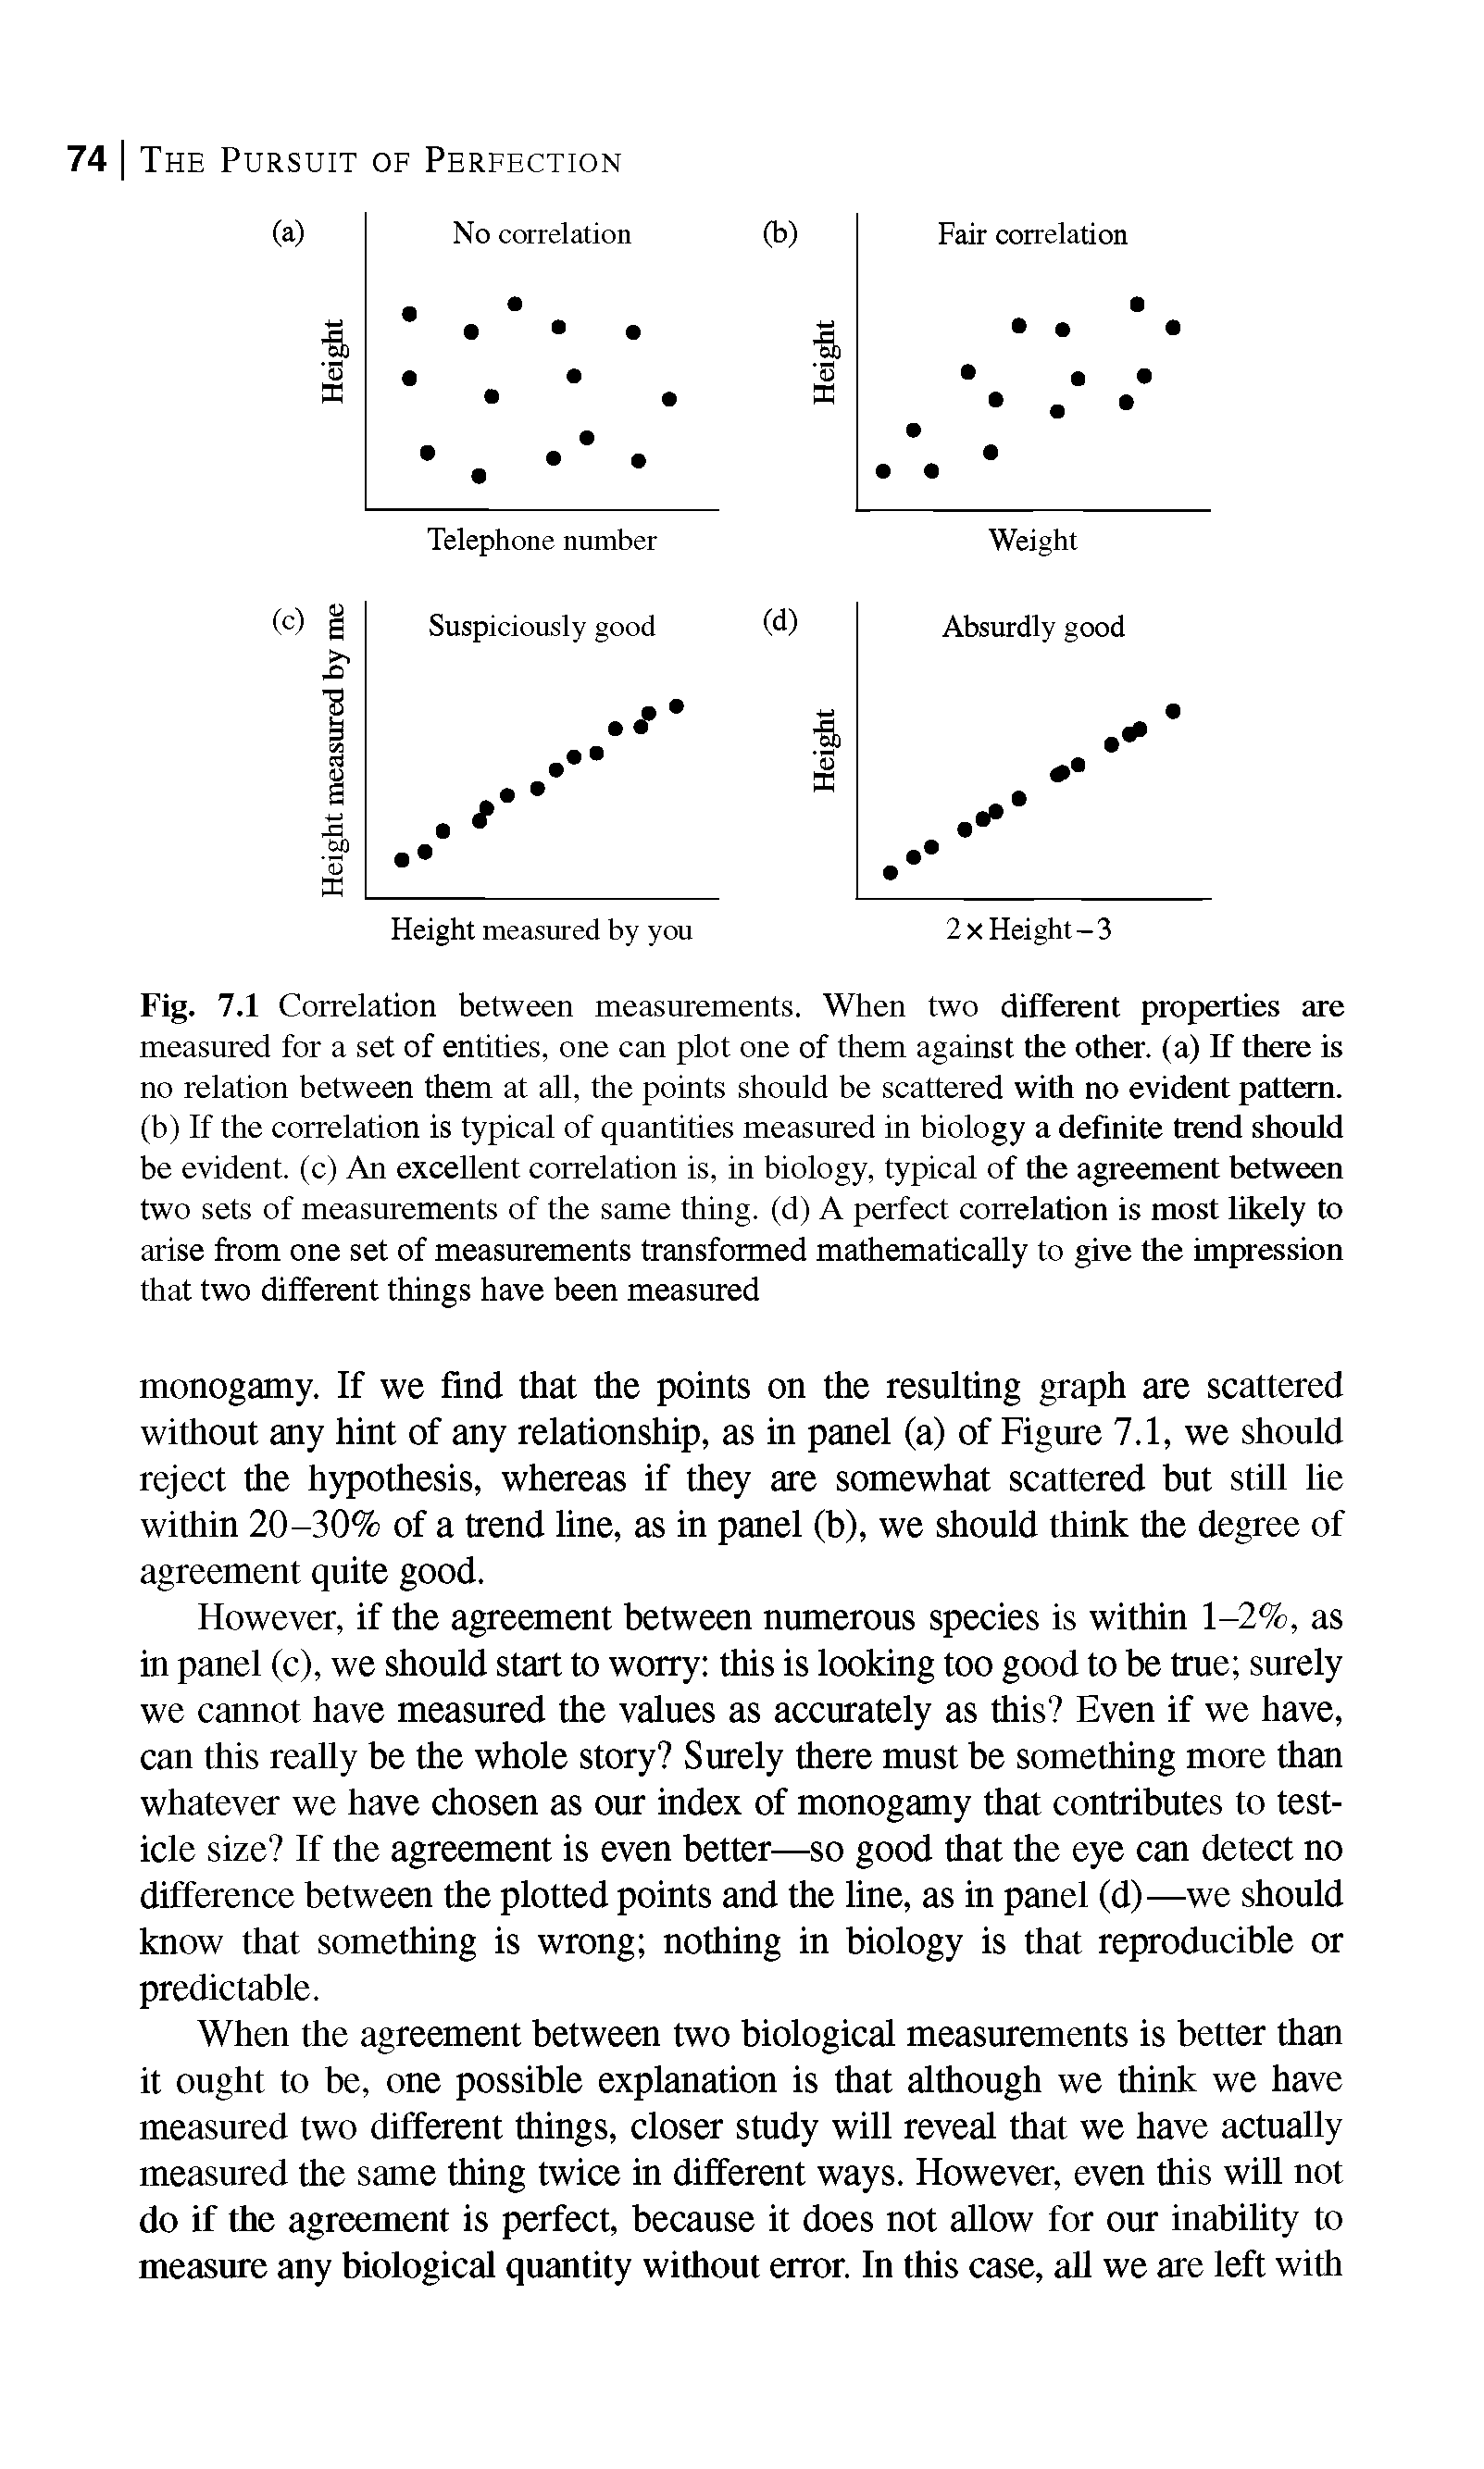 Fig. 7.1 Correlation between measurements. When two different properties are measured for a set of entities, one can plot one of them against the other, (a) If there is no relation between them at all, the points should be scattered with no evident pattern, (b) If the correlation is typical of quantities measured in biology a definite trend should be evident, (c) An excellent correlation is, in biology, typical of the agreement between two sets of measurements of the same thing, (d) A perfect correlation is most likely to arise from one set of measurements transformed mathematically to give the impression that two different things have been measured...